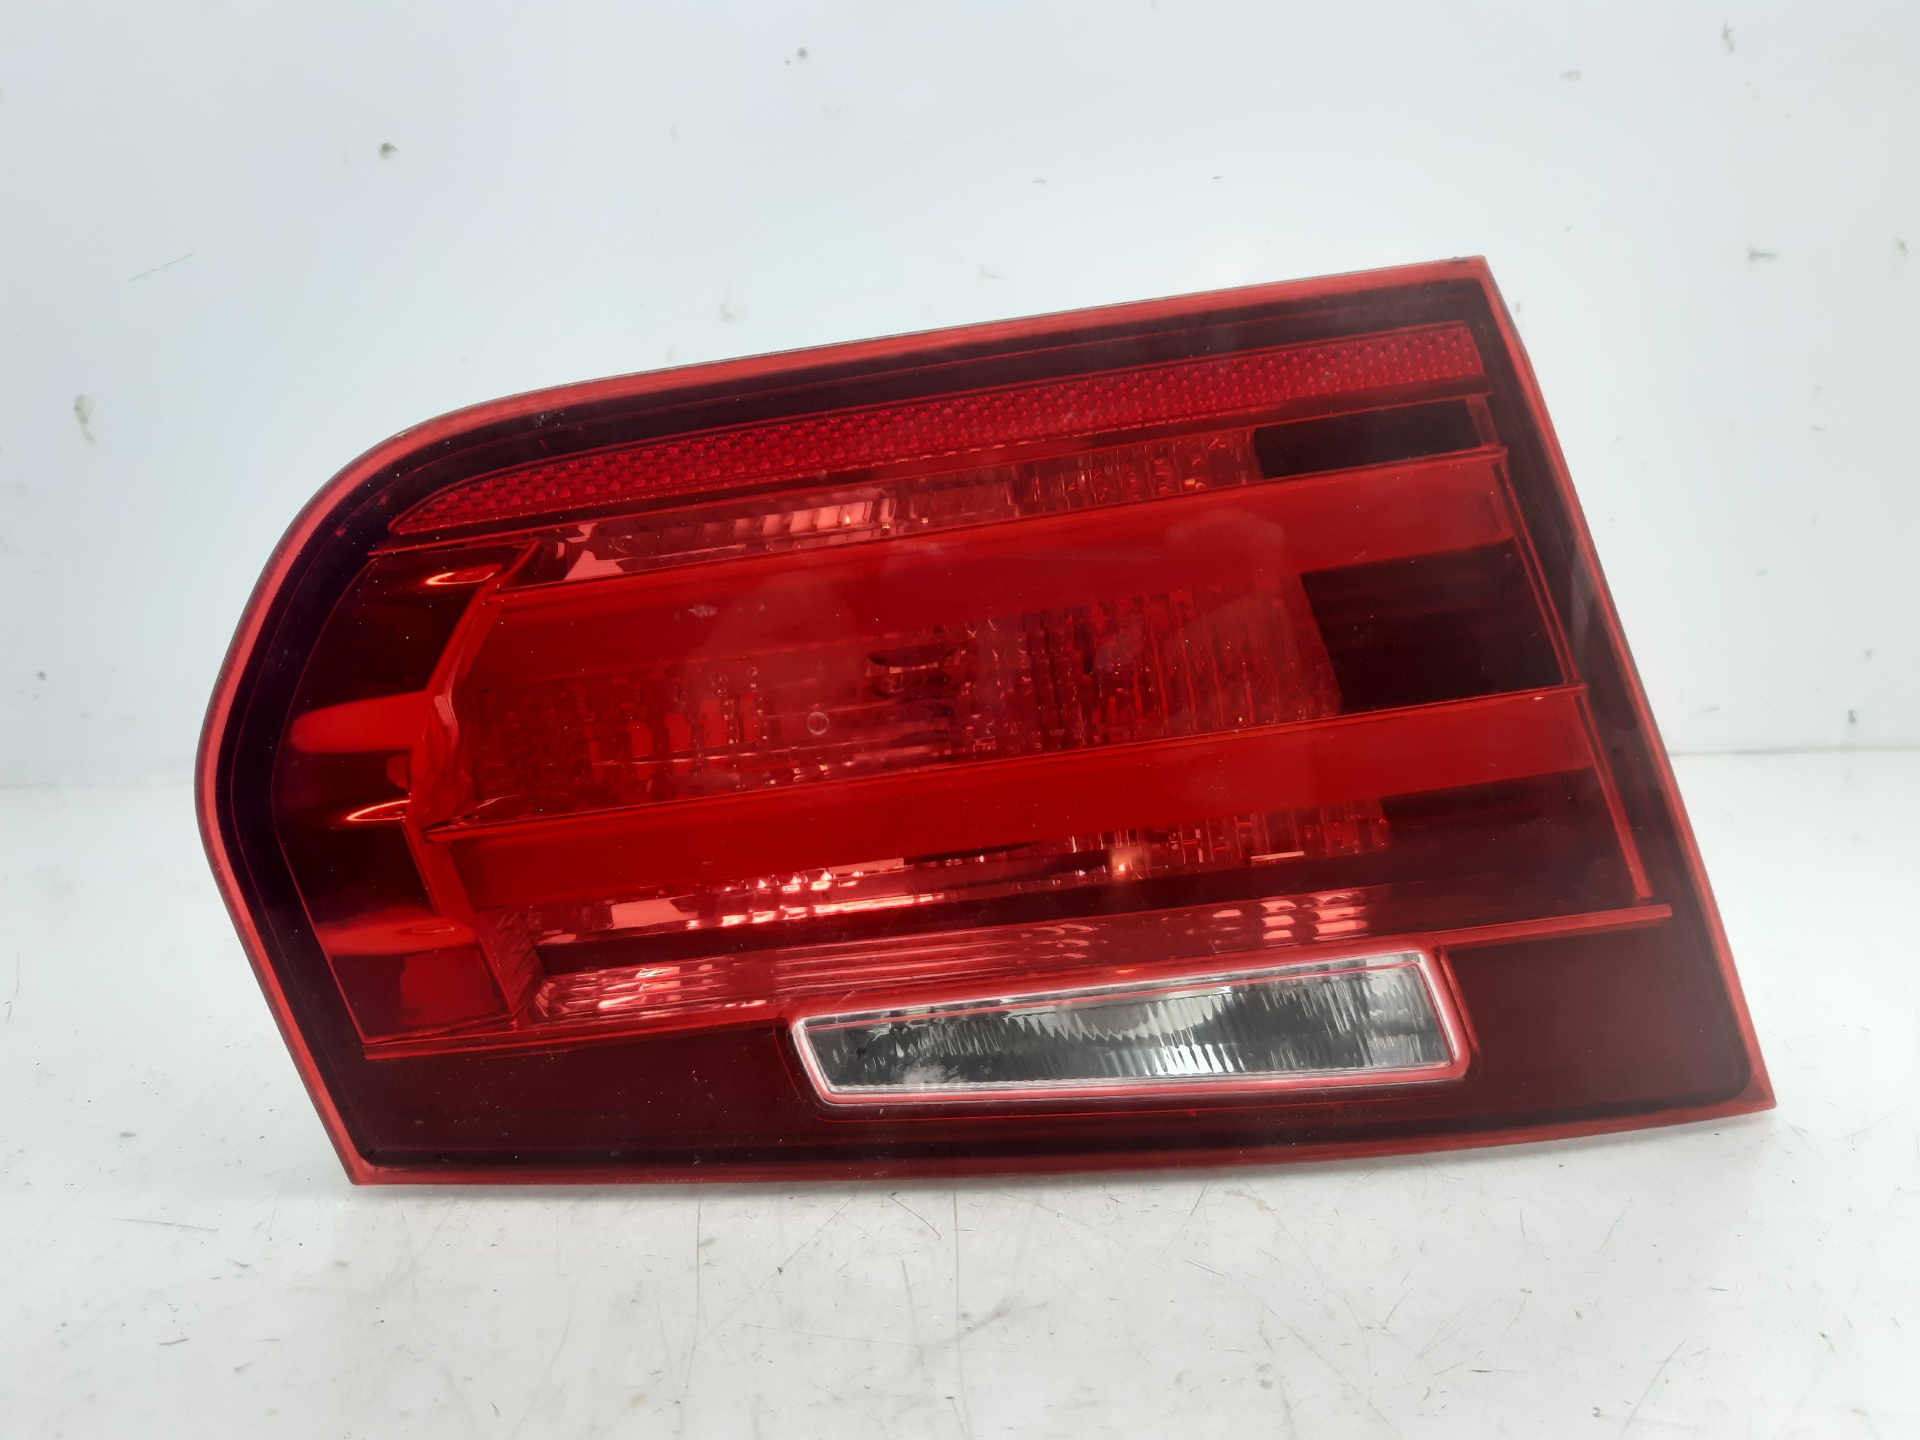 BMW 3 Series F30/F31 (2011-2020) Rear Right Taillight Lamp 6321737111101, 118.723KMS, 4PUERTAS 24021135